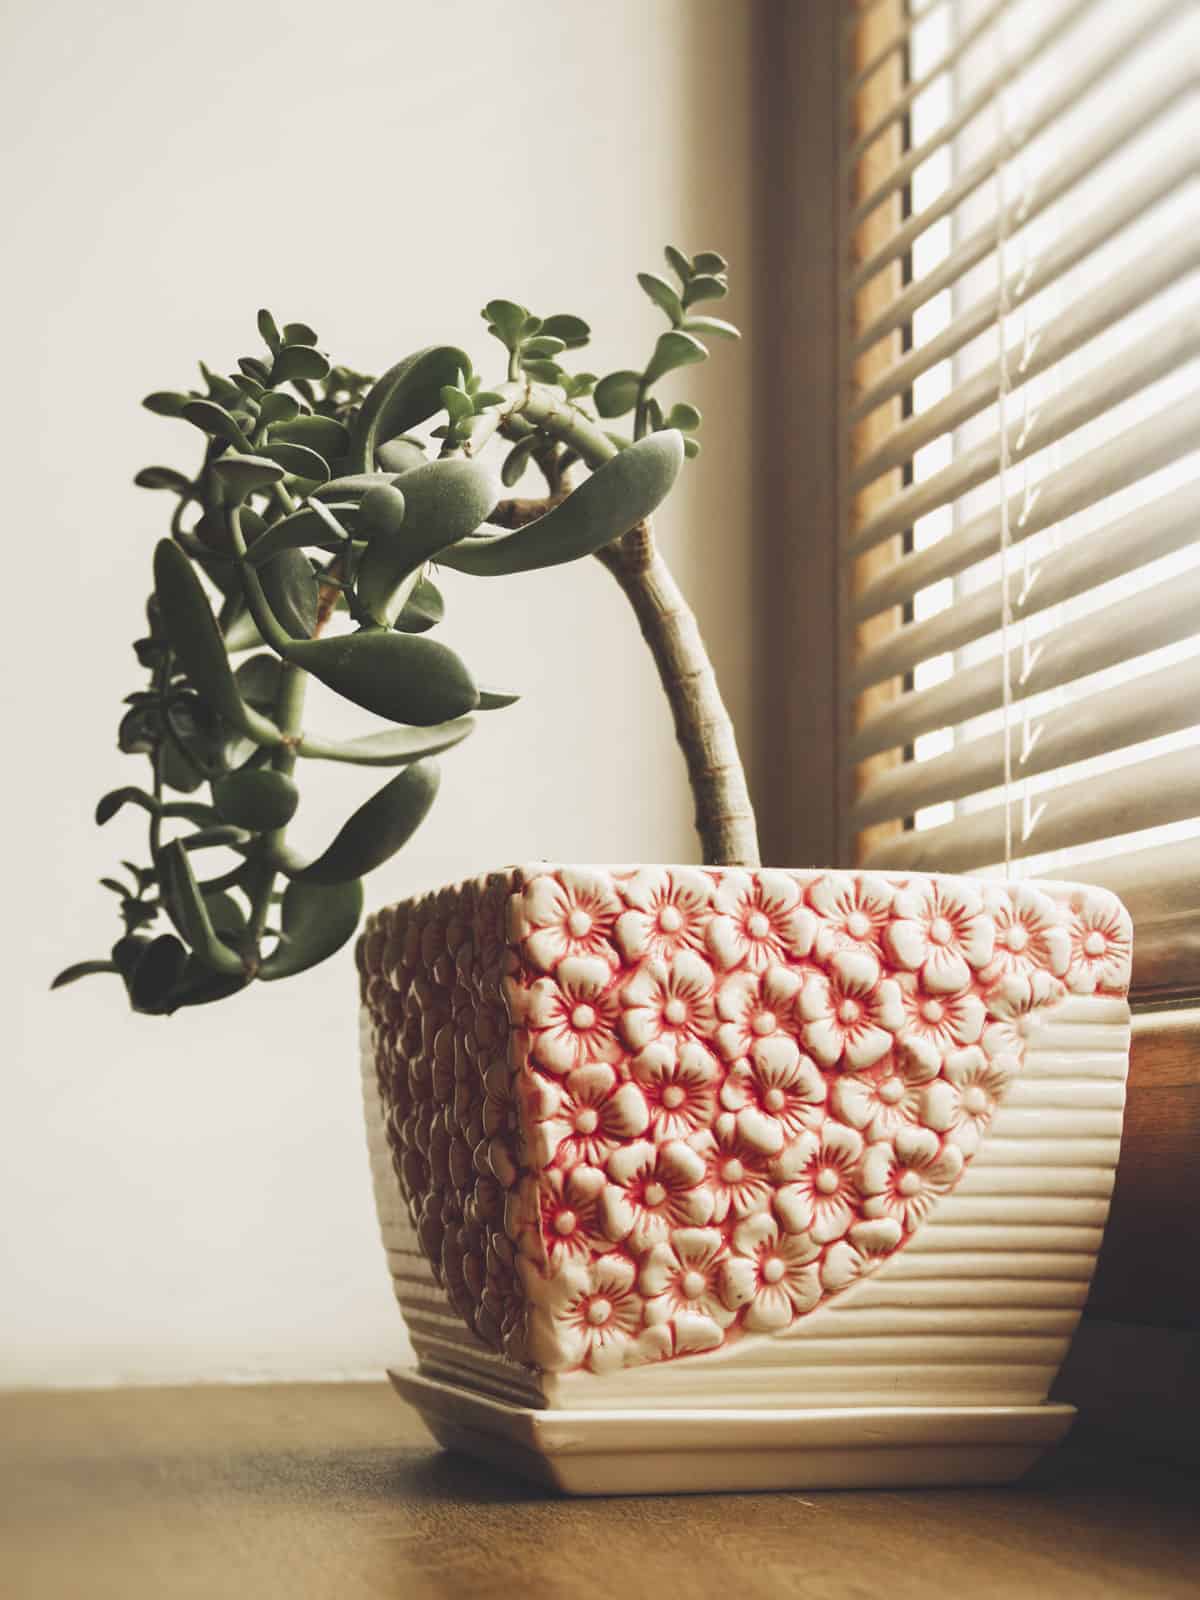 A small leaning jade plant placed near the window